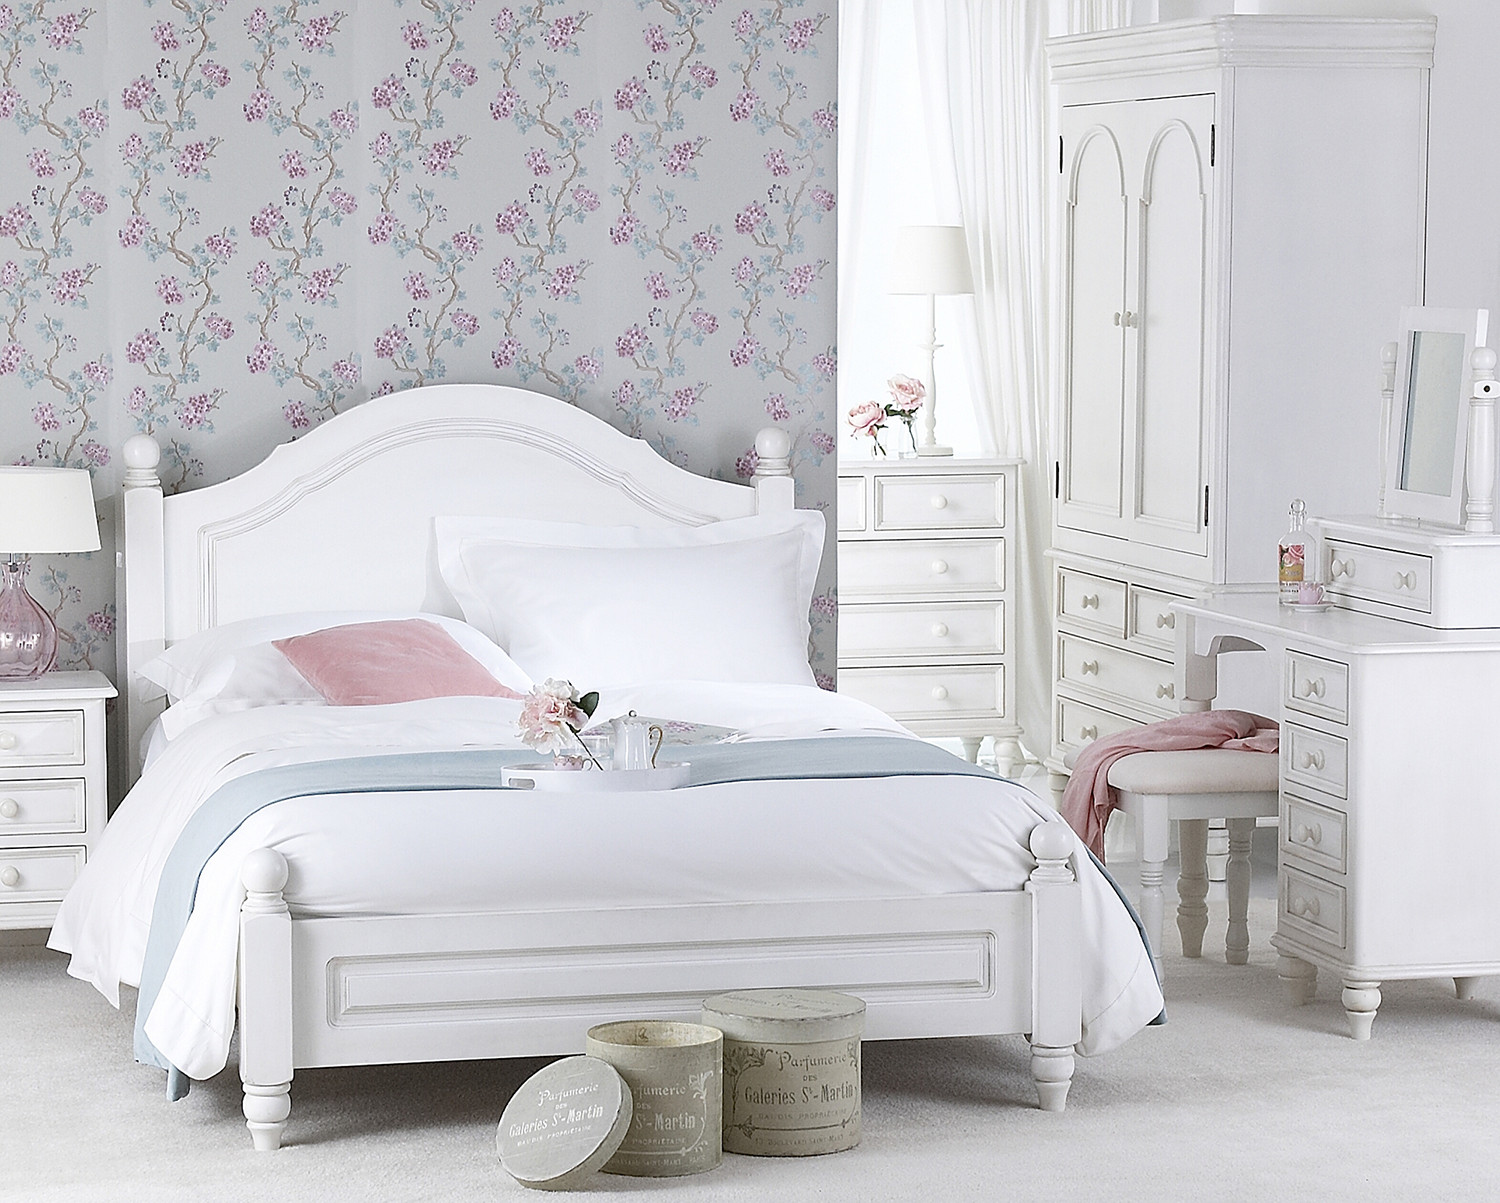 Shabby Chic Bedroom Furniture
 PROVENCE Antique White Bedroom Furniture Shabby Chic